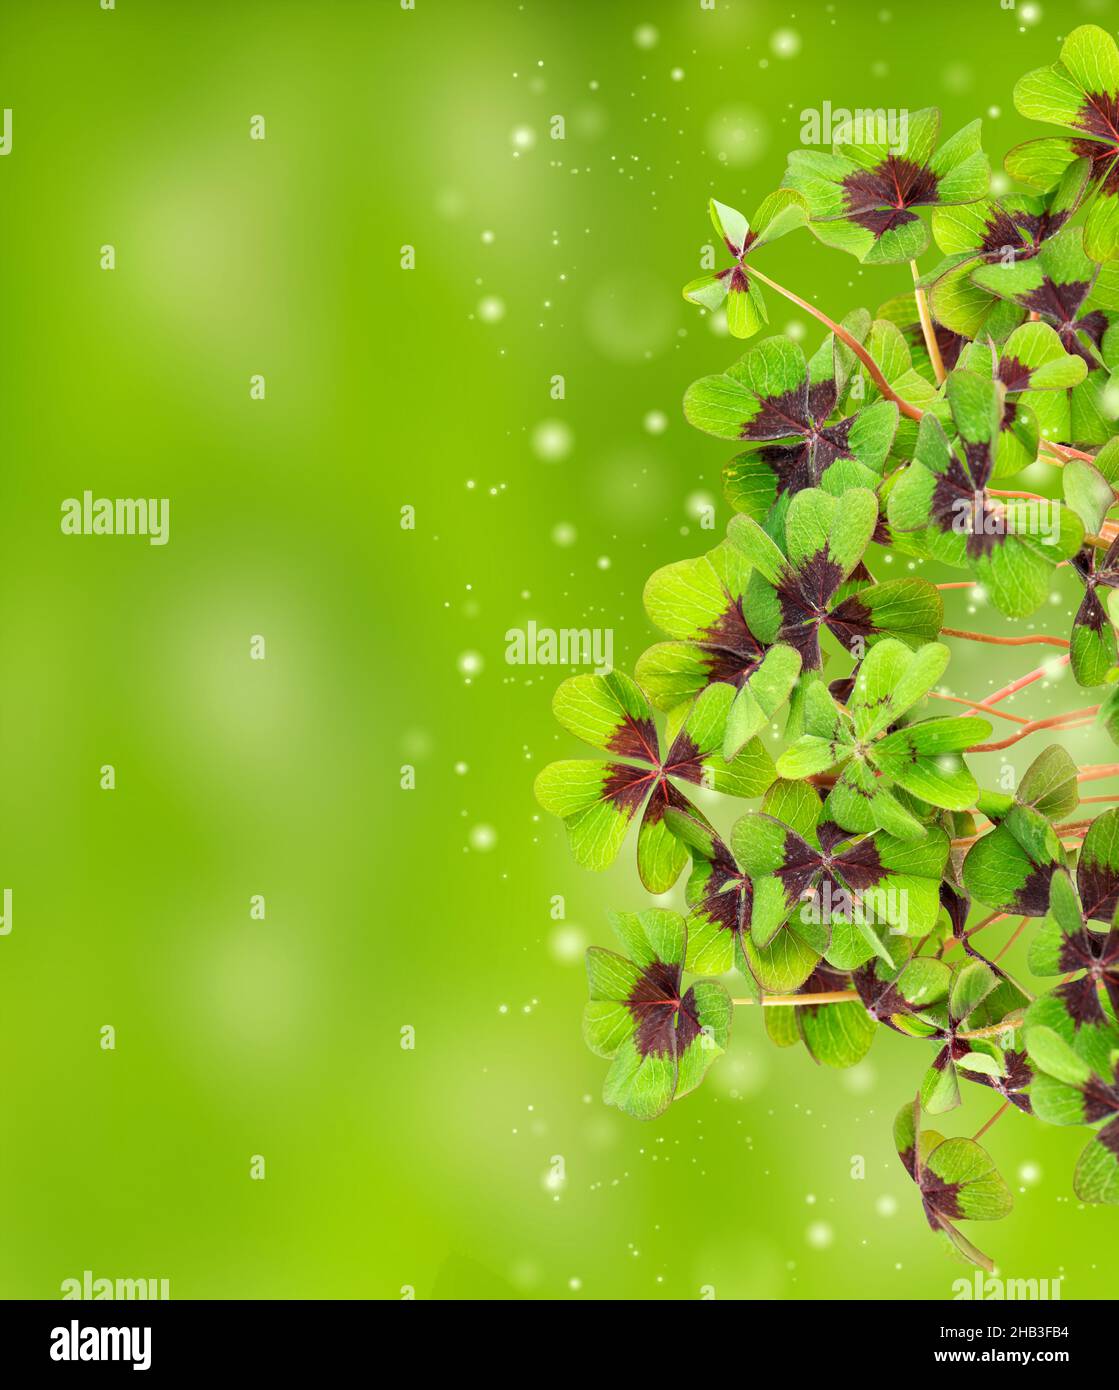 Fresh green four leaved clover on blurred background Stock Photo